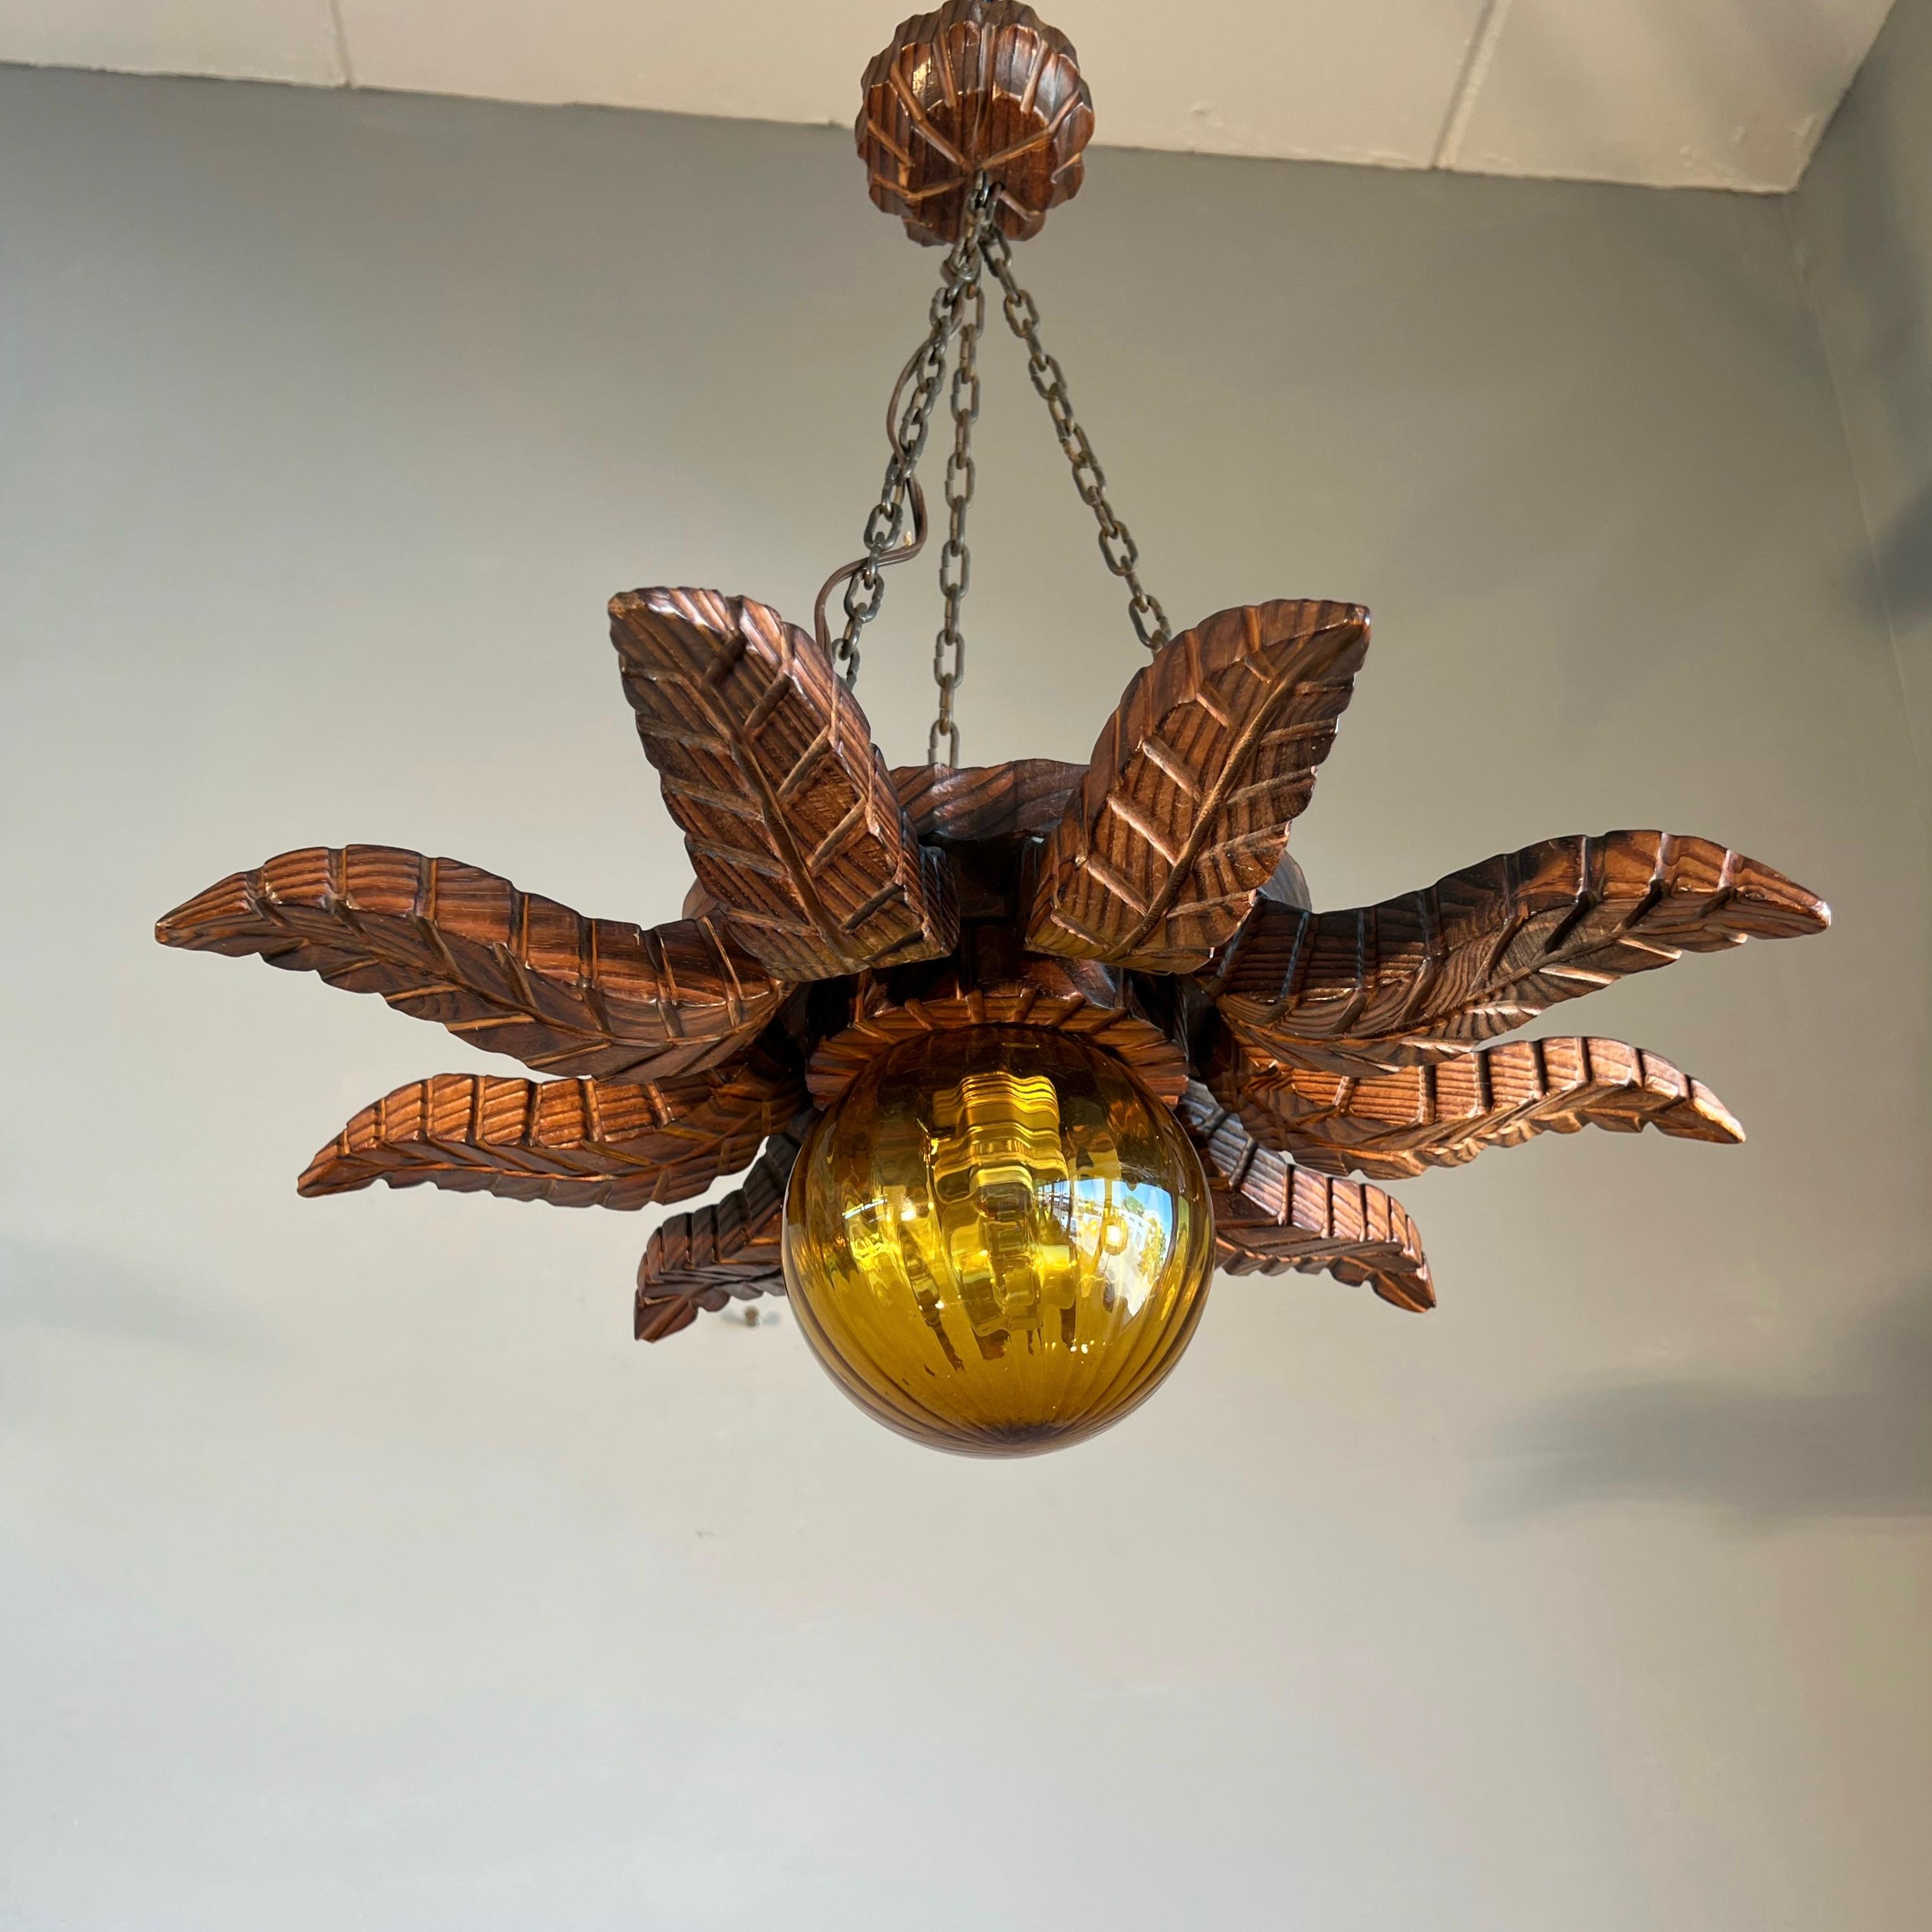 Rare design and good size pendant with a stylish, mouth blown art glass shade.

If you are looking for a striking and extraordinary light fixture to grace your midcentury living or work space then this work of lighting art could be the one for